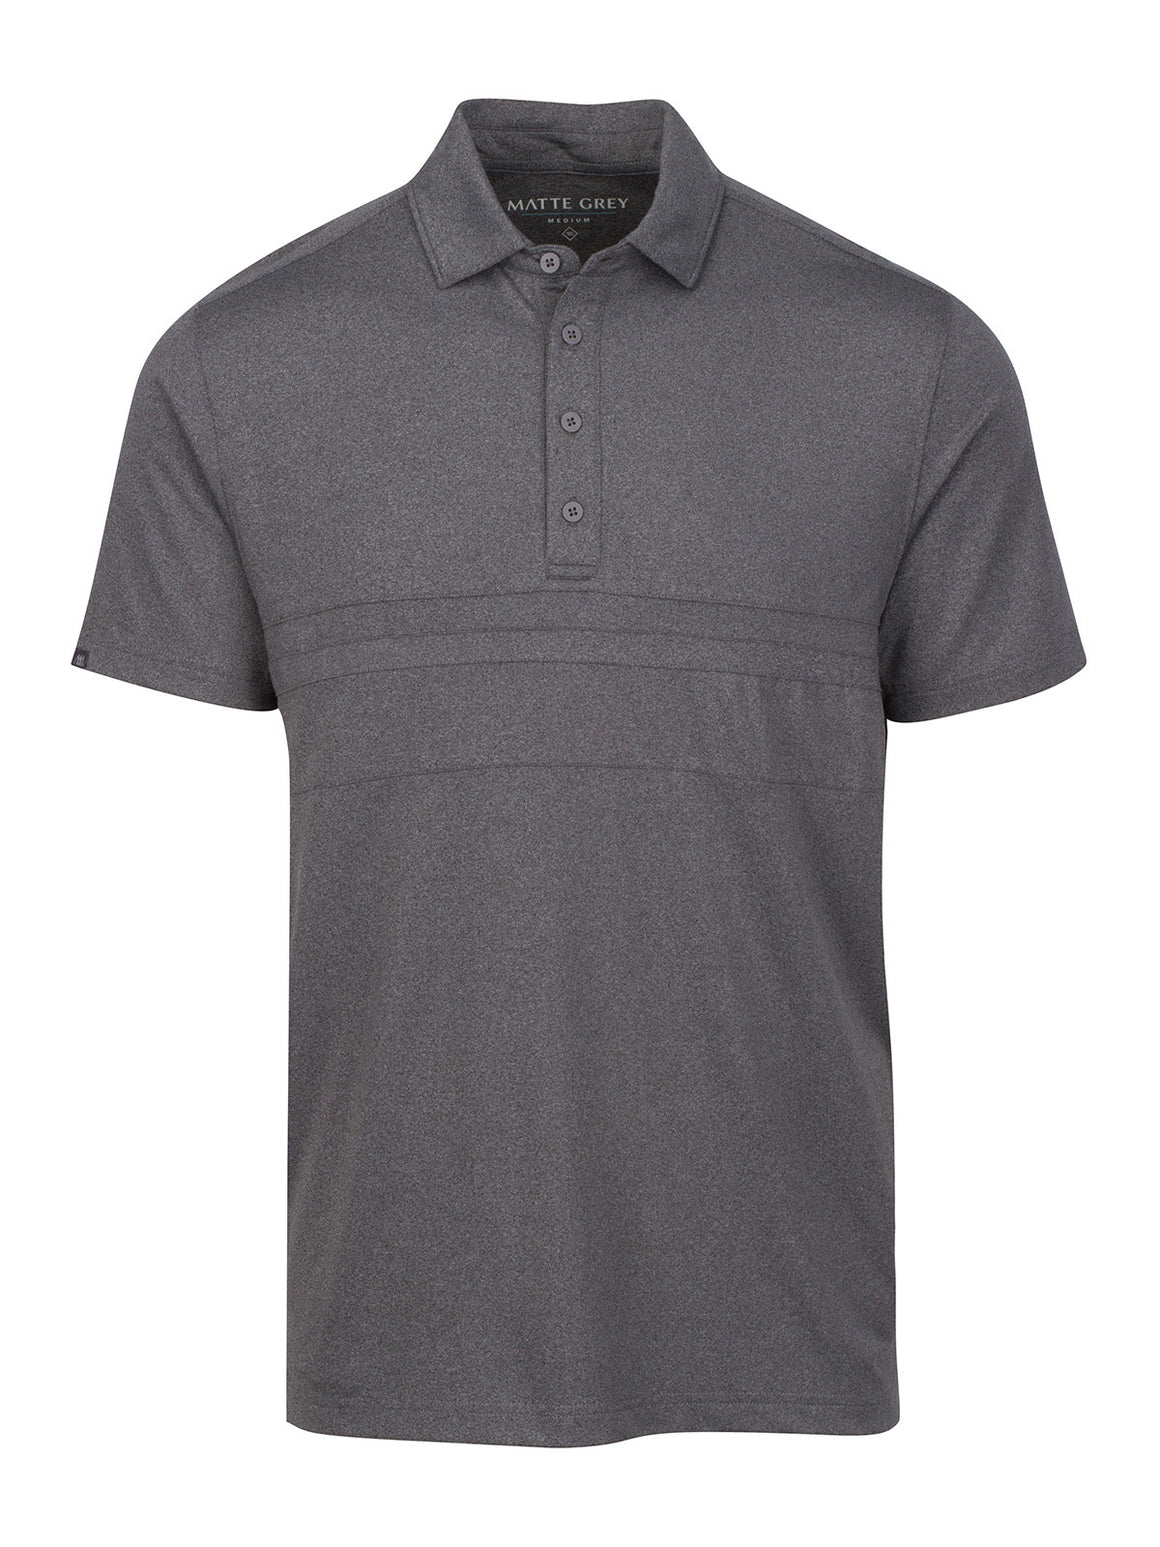 Anders - Charcoal Heather